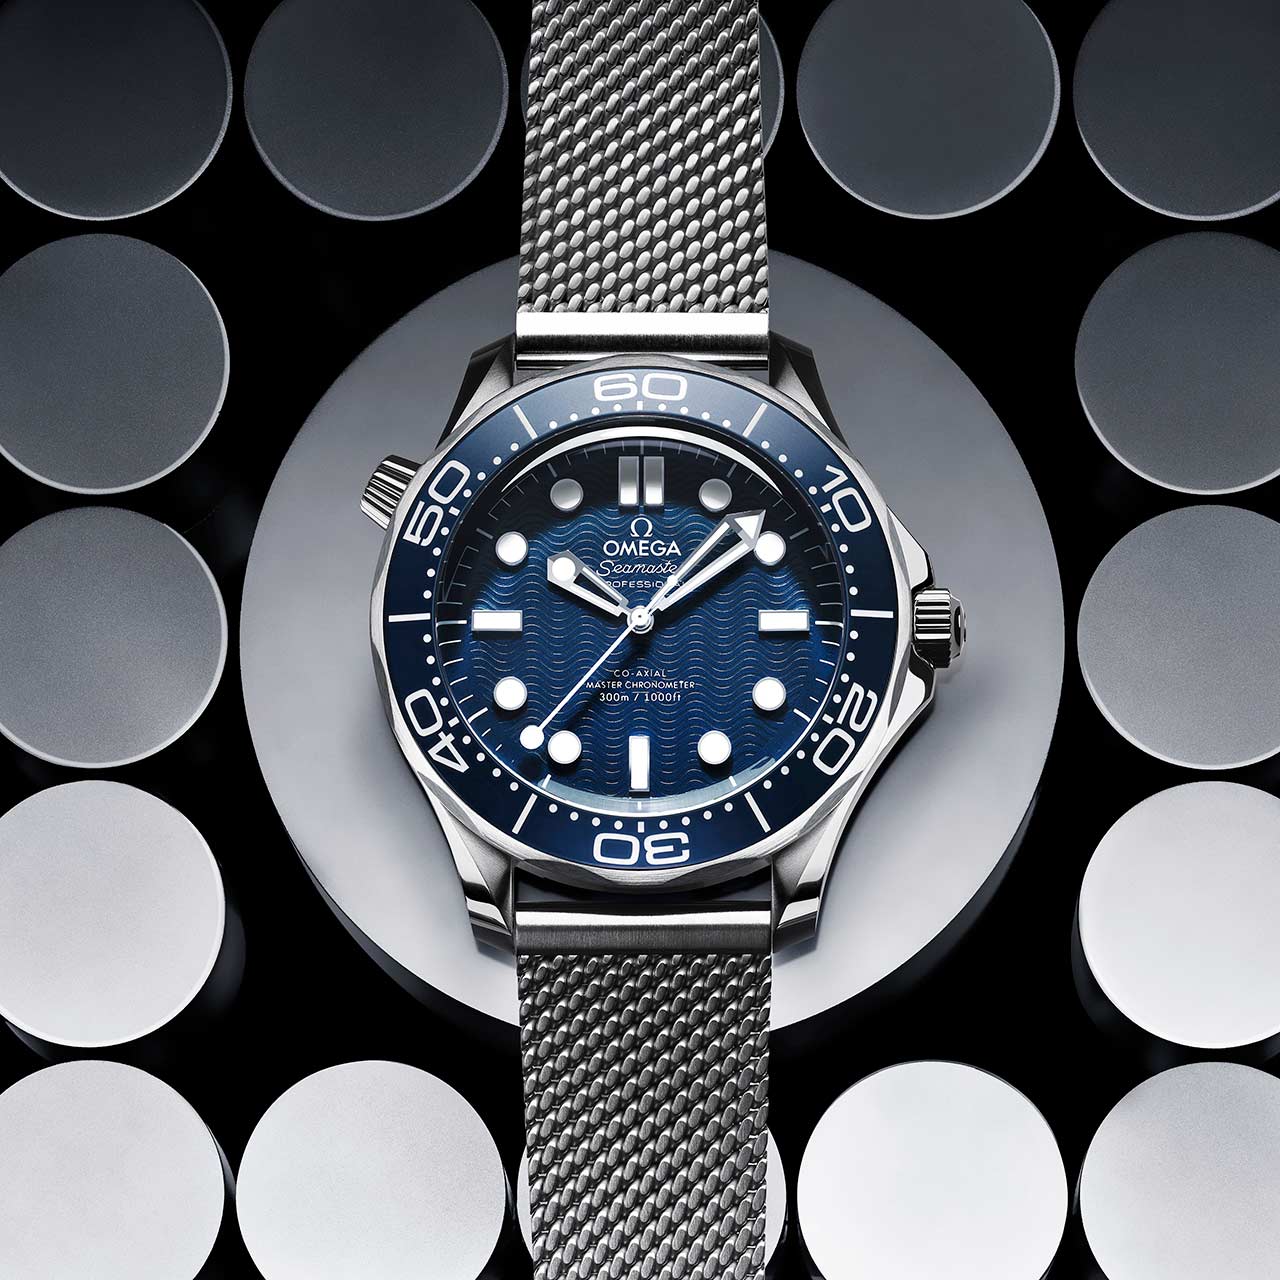 Omega Seamaster Diver 300m 60 Years Of James Bond Time And Watches